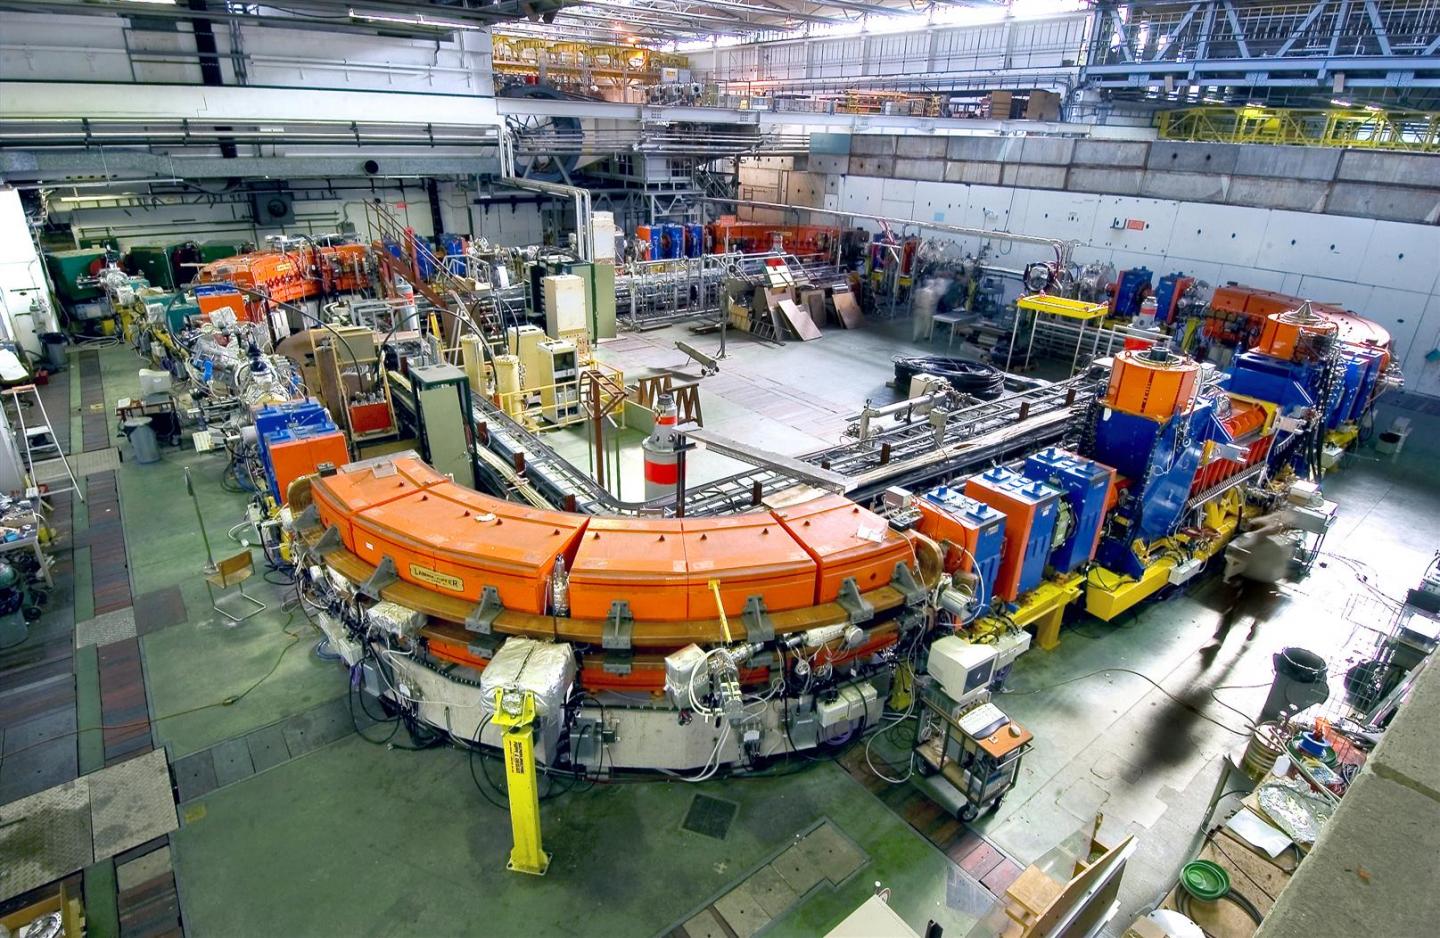 Proposal to use CERN accelerator for biomedical research